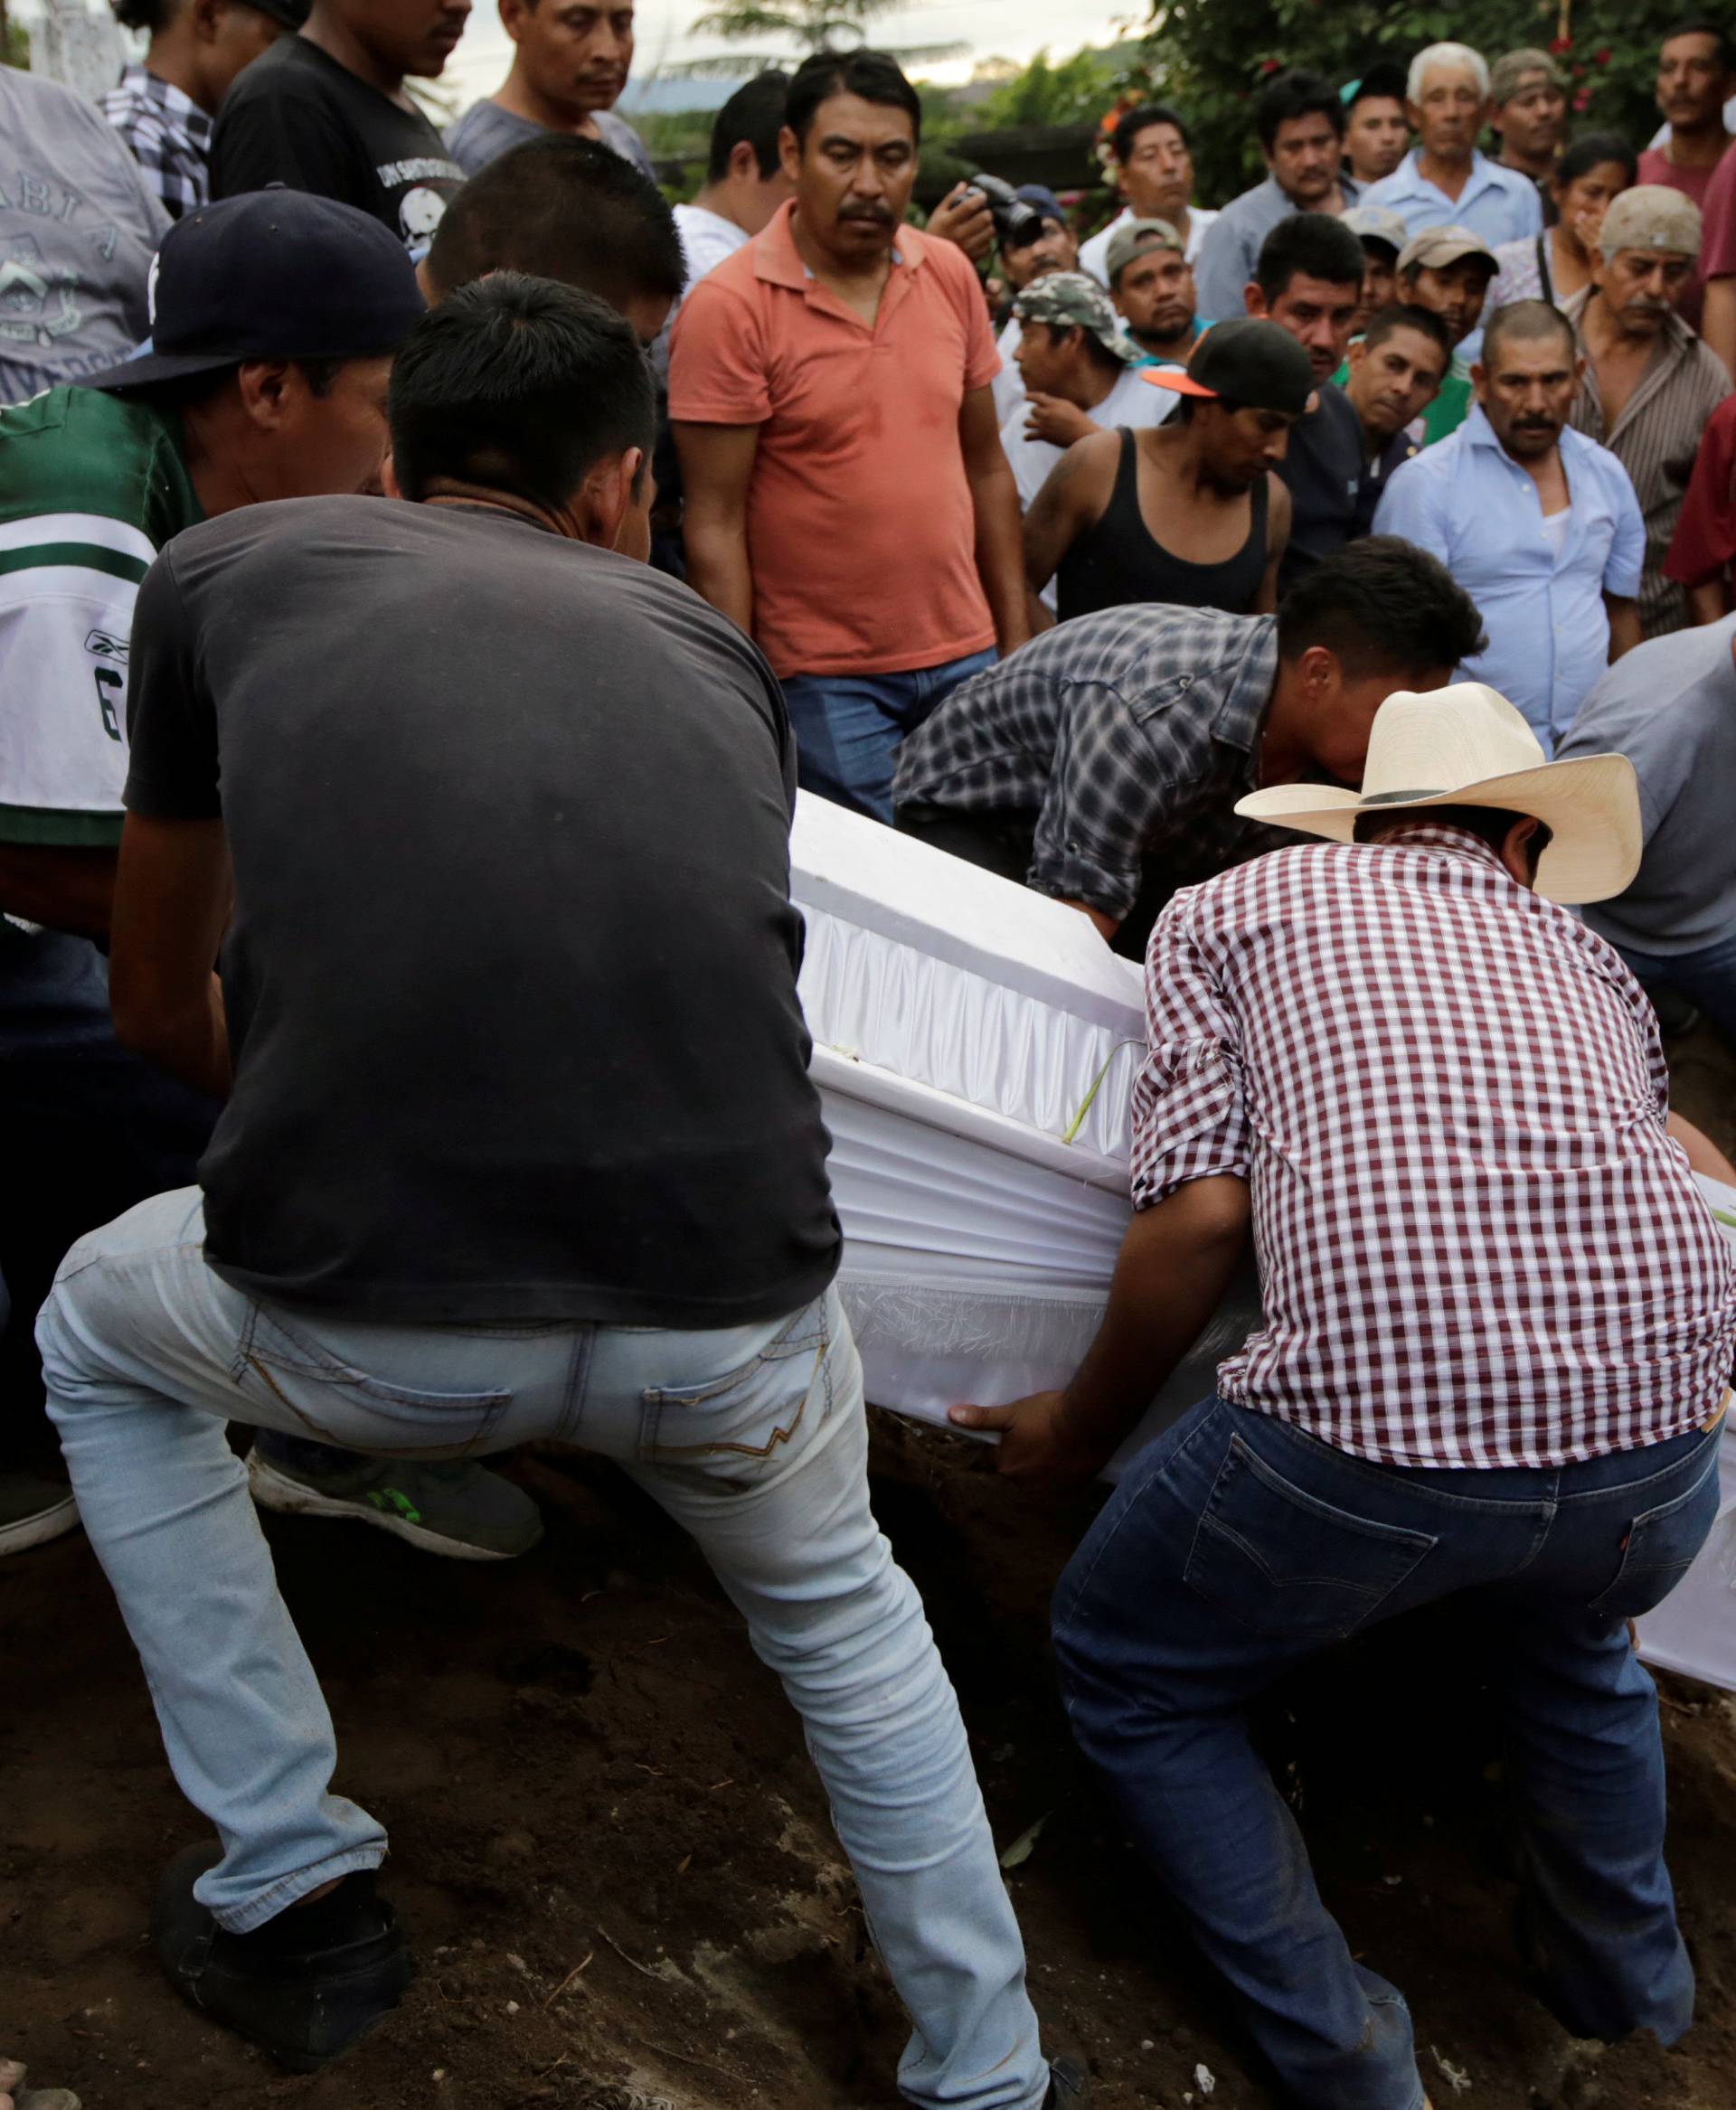 People lower casket of earthquake victim into grave, in Atzala